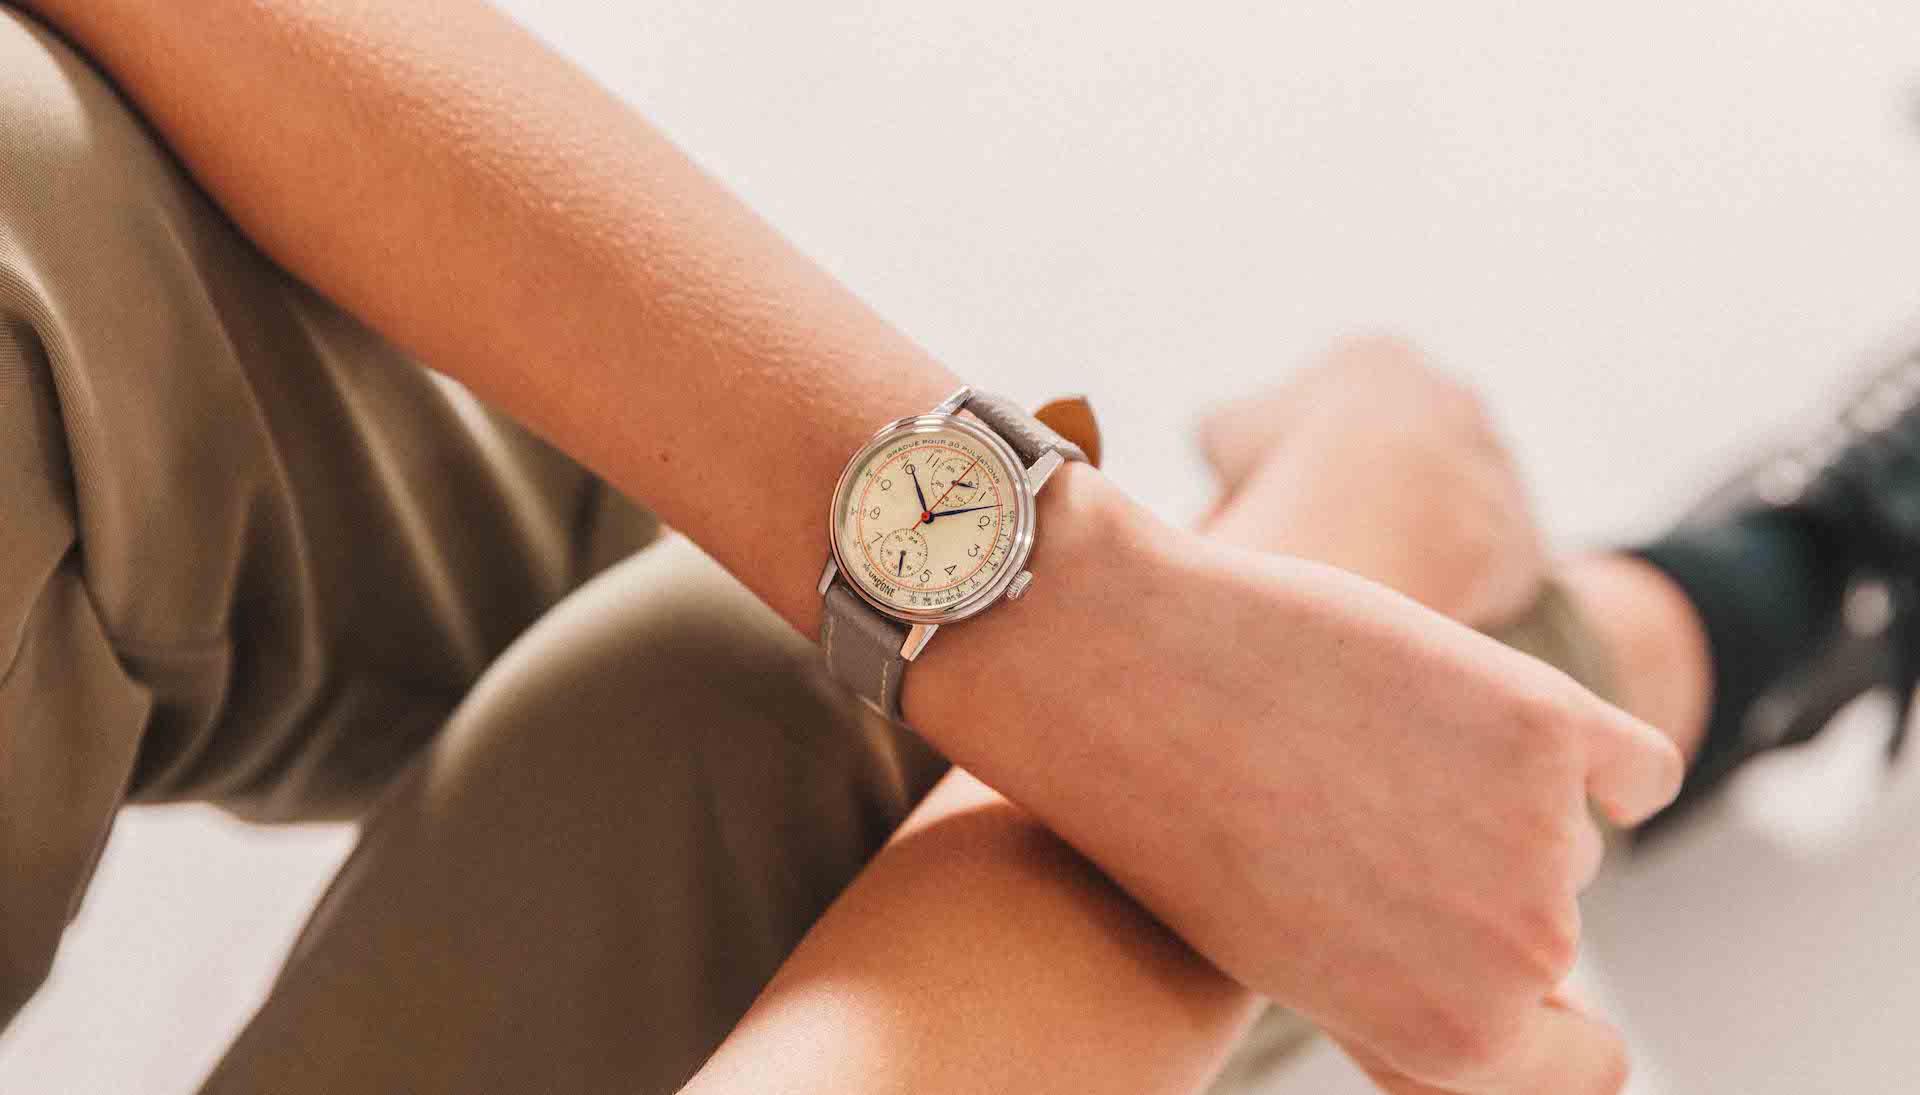 The Undone Urban 34 Killy Watch Just In Time For Mother's Day ...